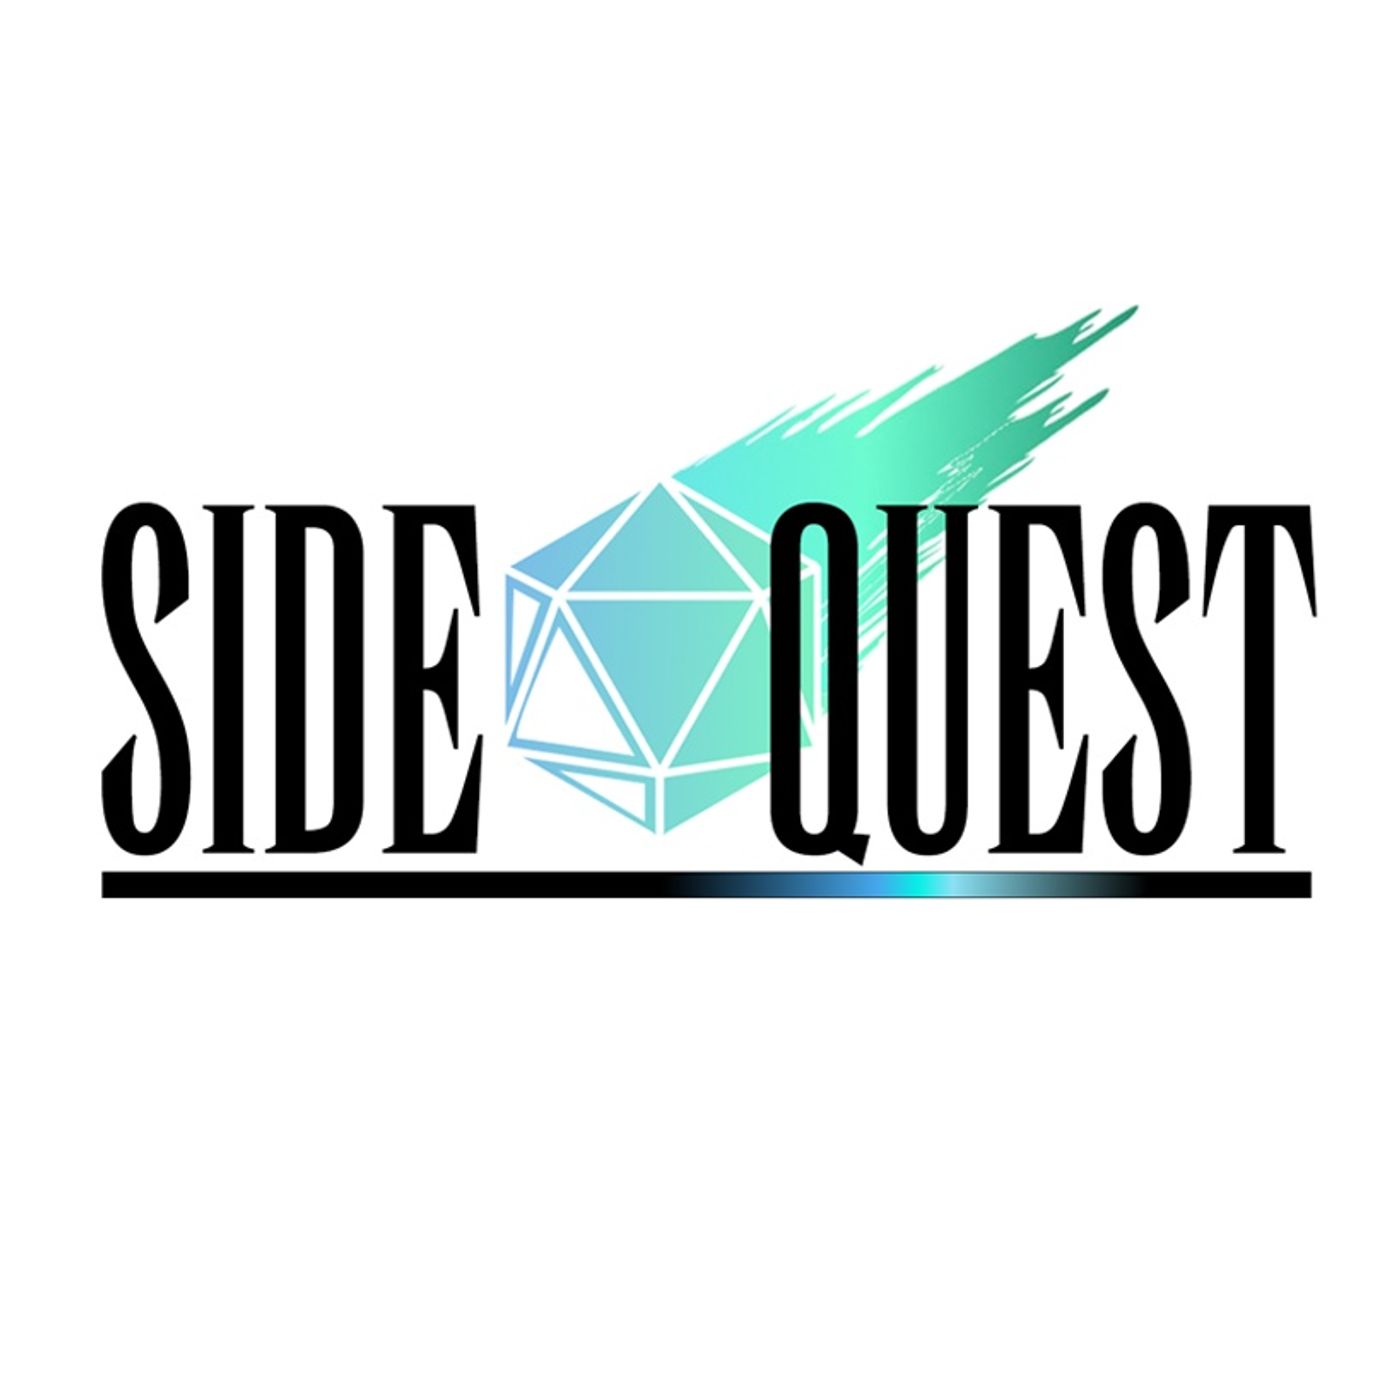 Side Quest 128: Road House?